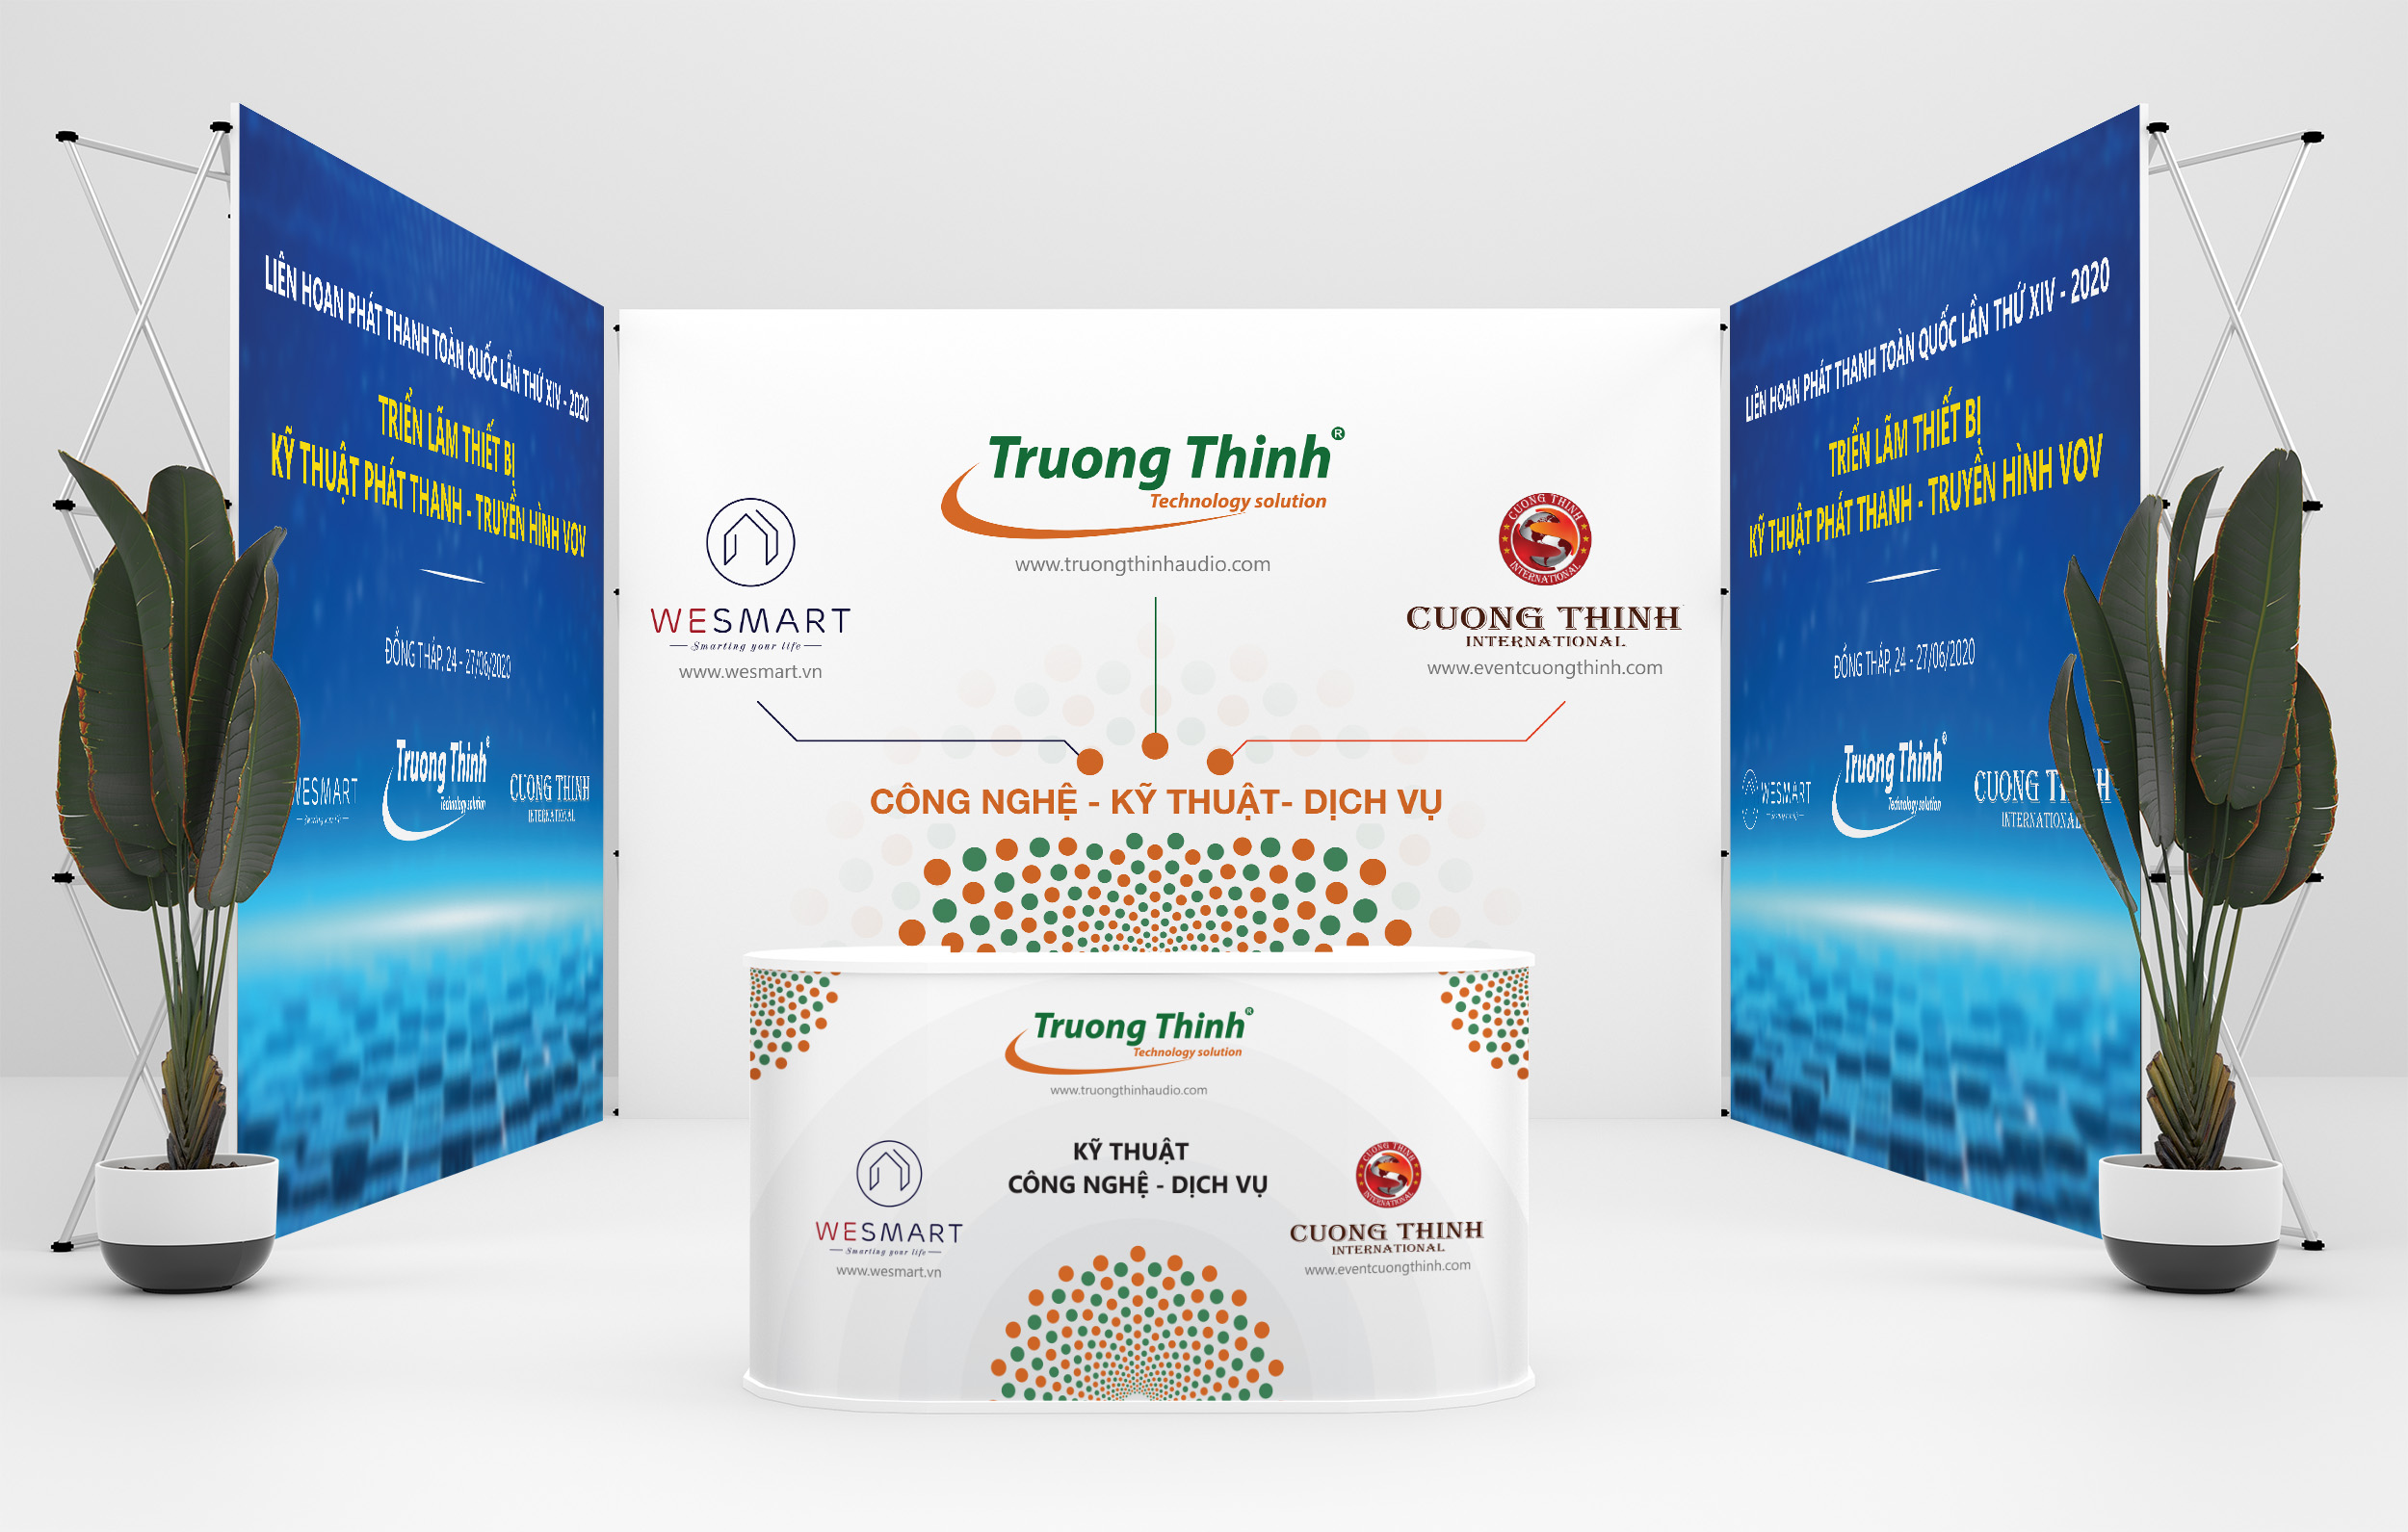 Trade Show Banner Stand Mockup. Template PSD.